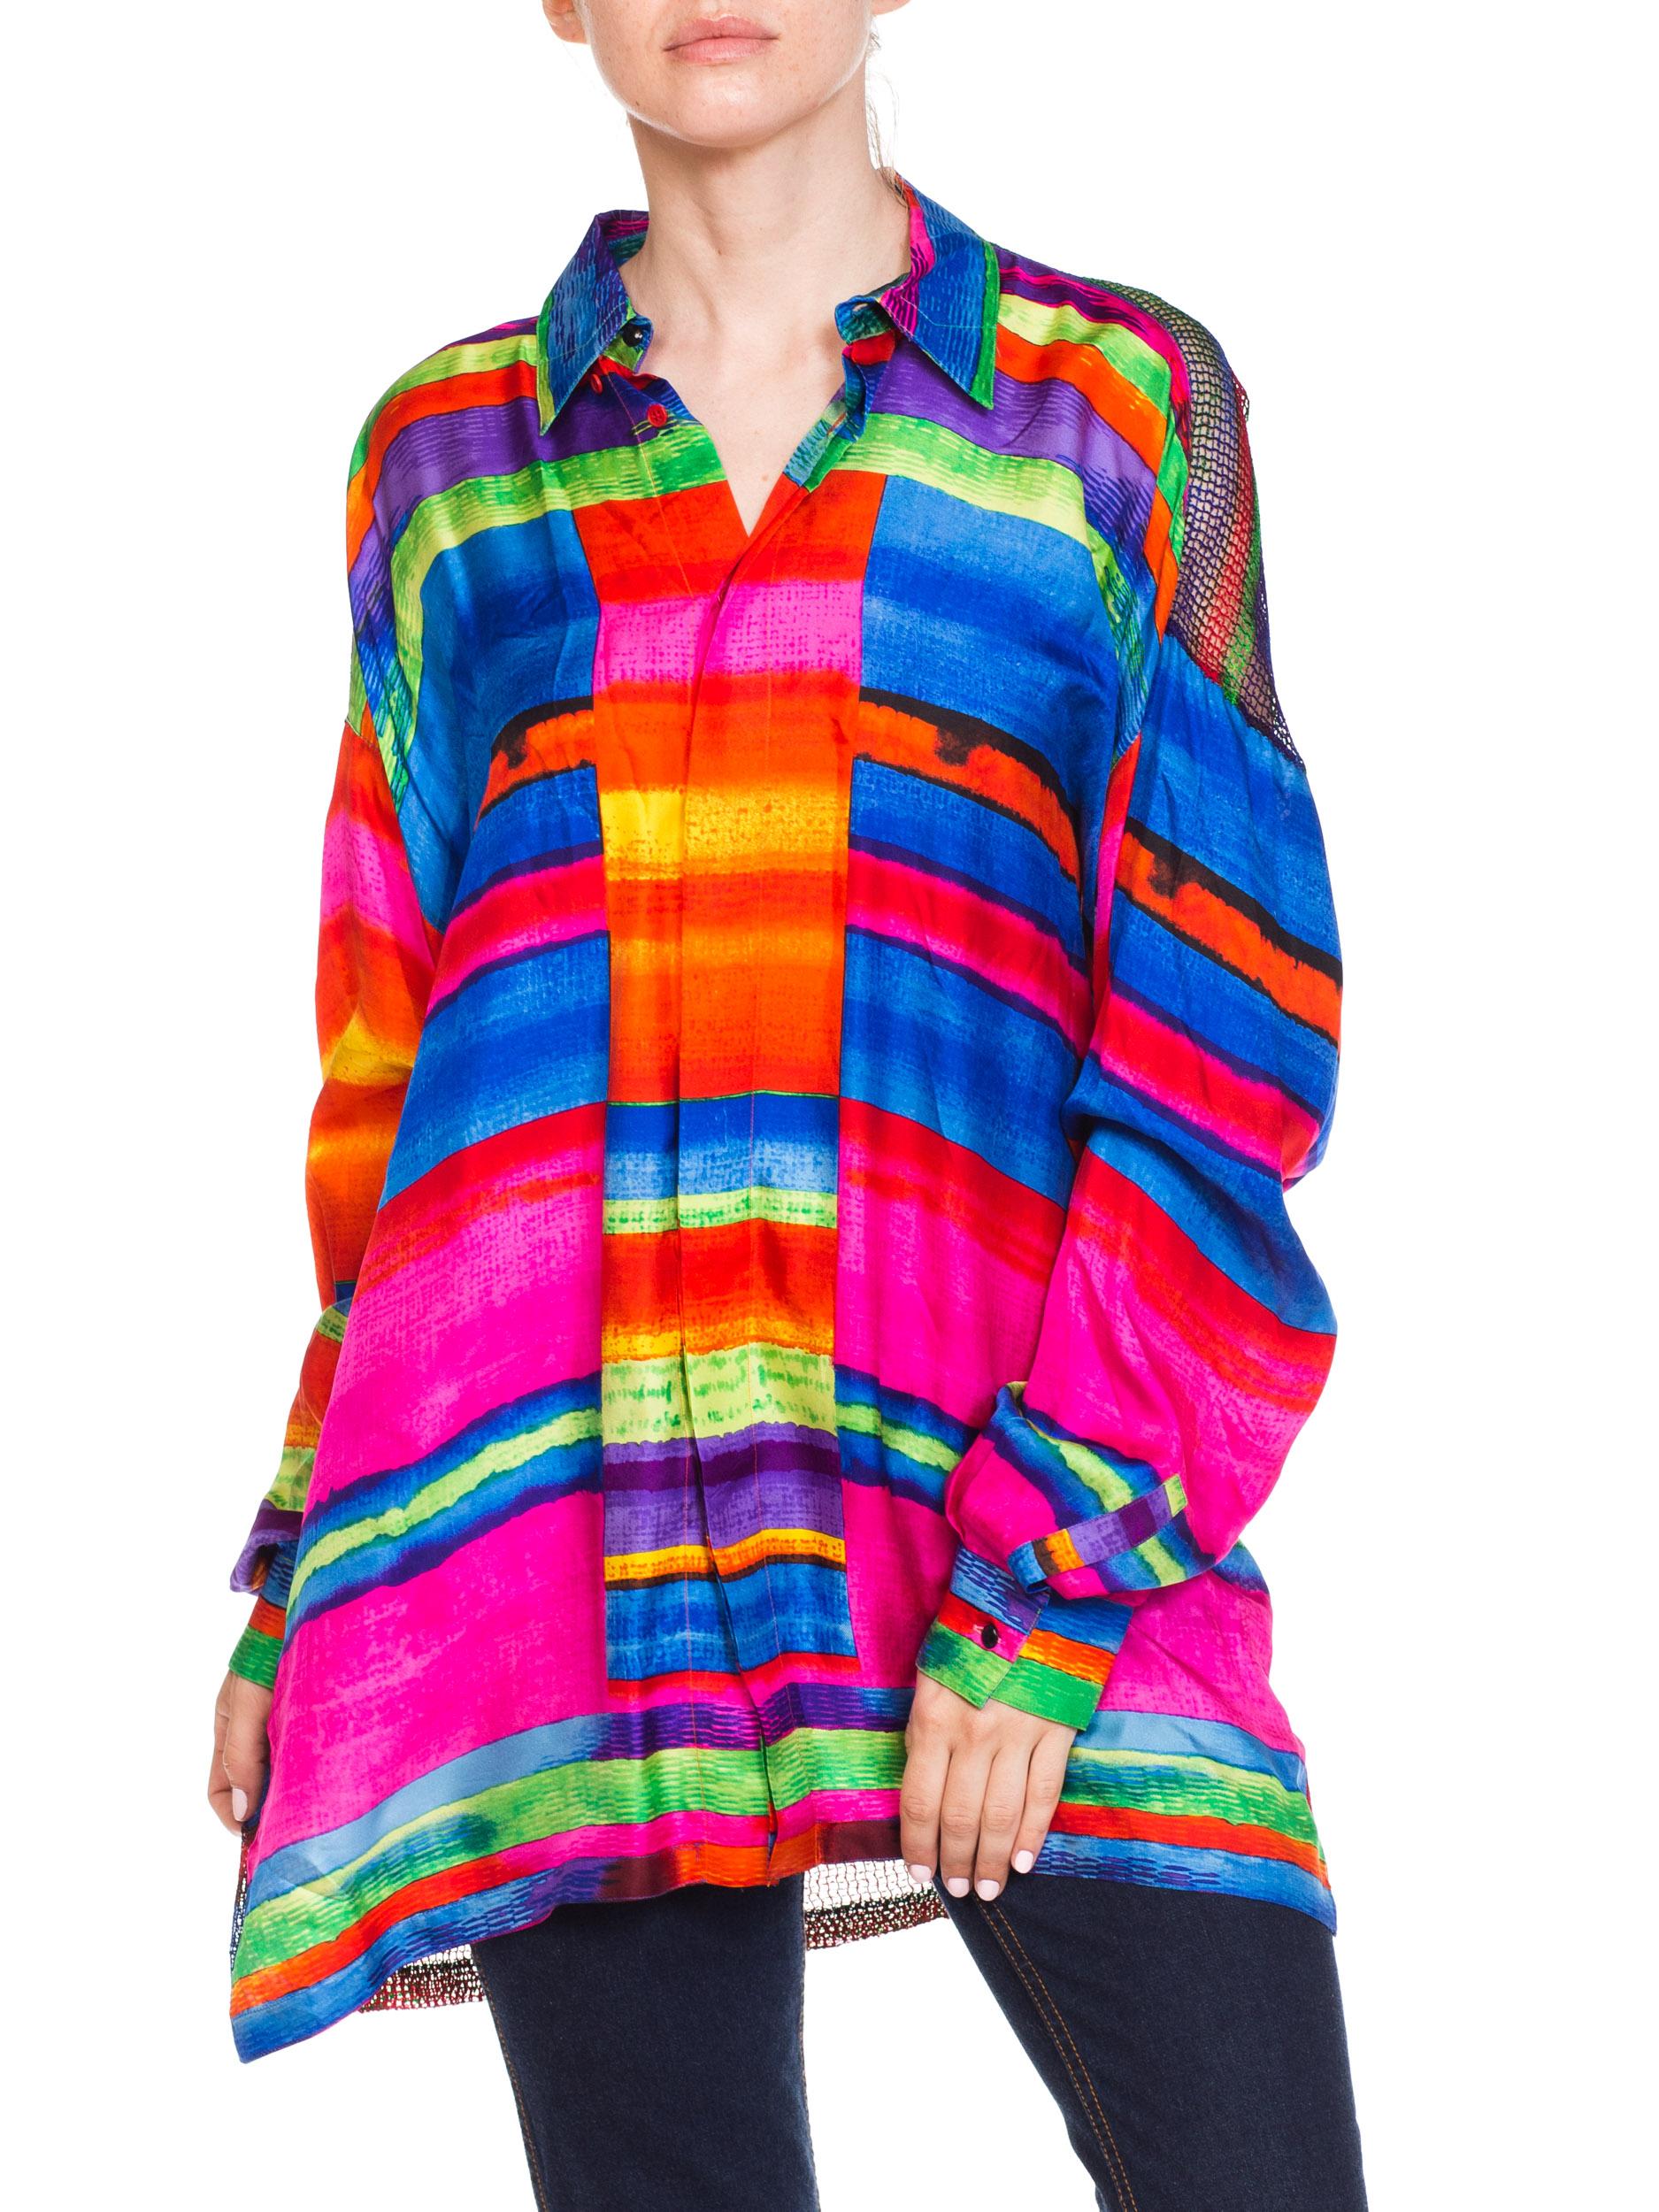 1990S GIANNI VERSACE Silk Men's Colorful Shirt With Sheer Net Back Panel 2